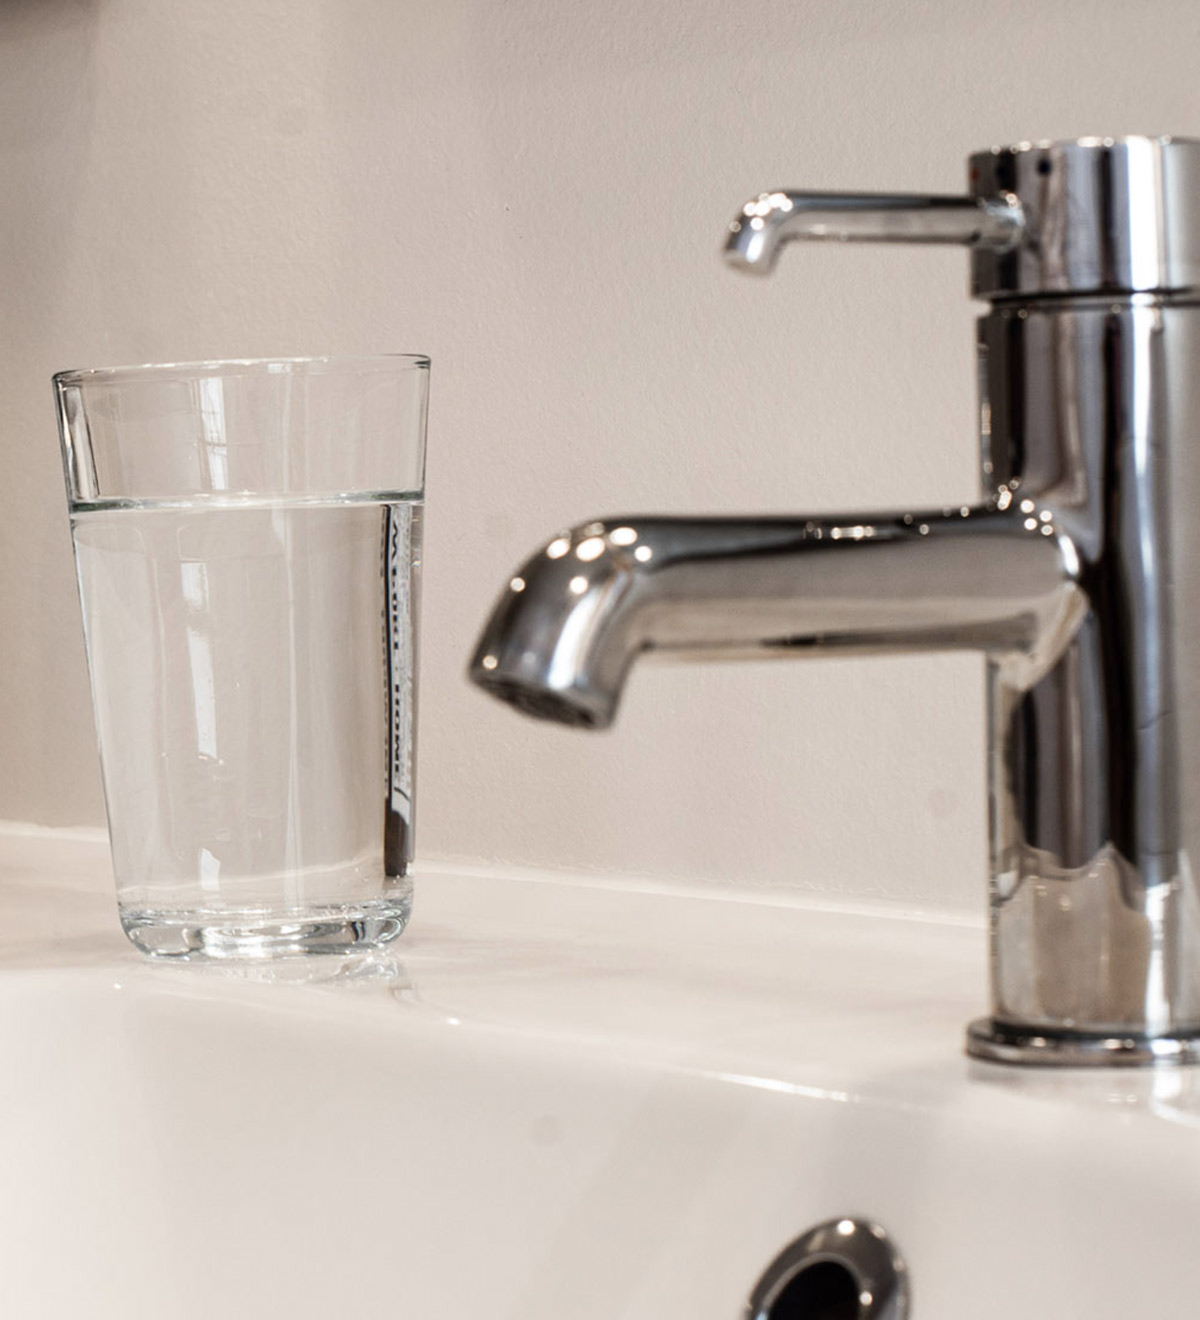 Sink with clean water in a glass.